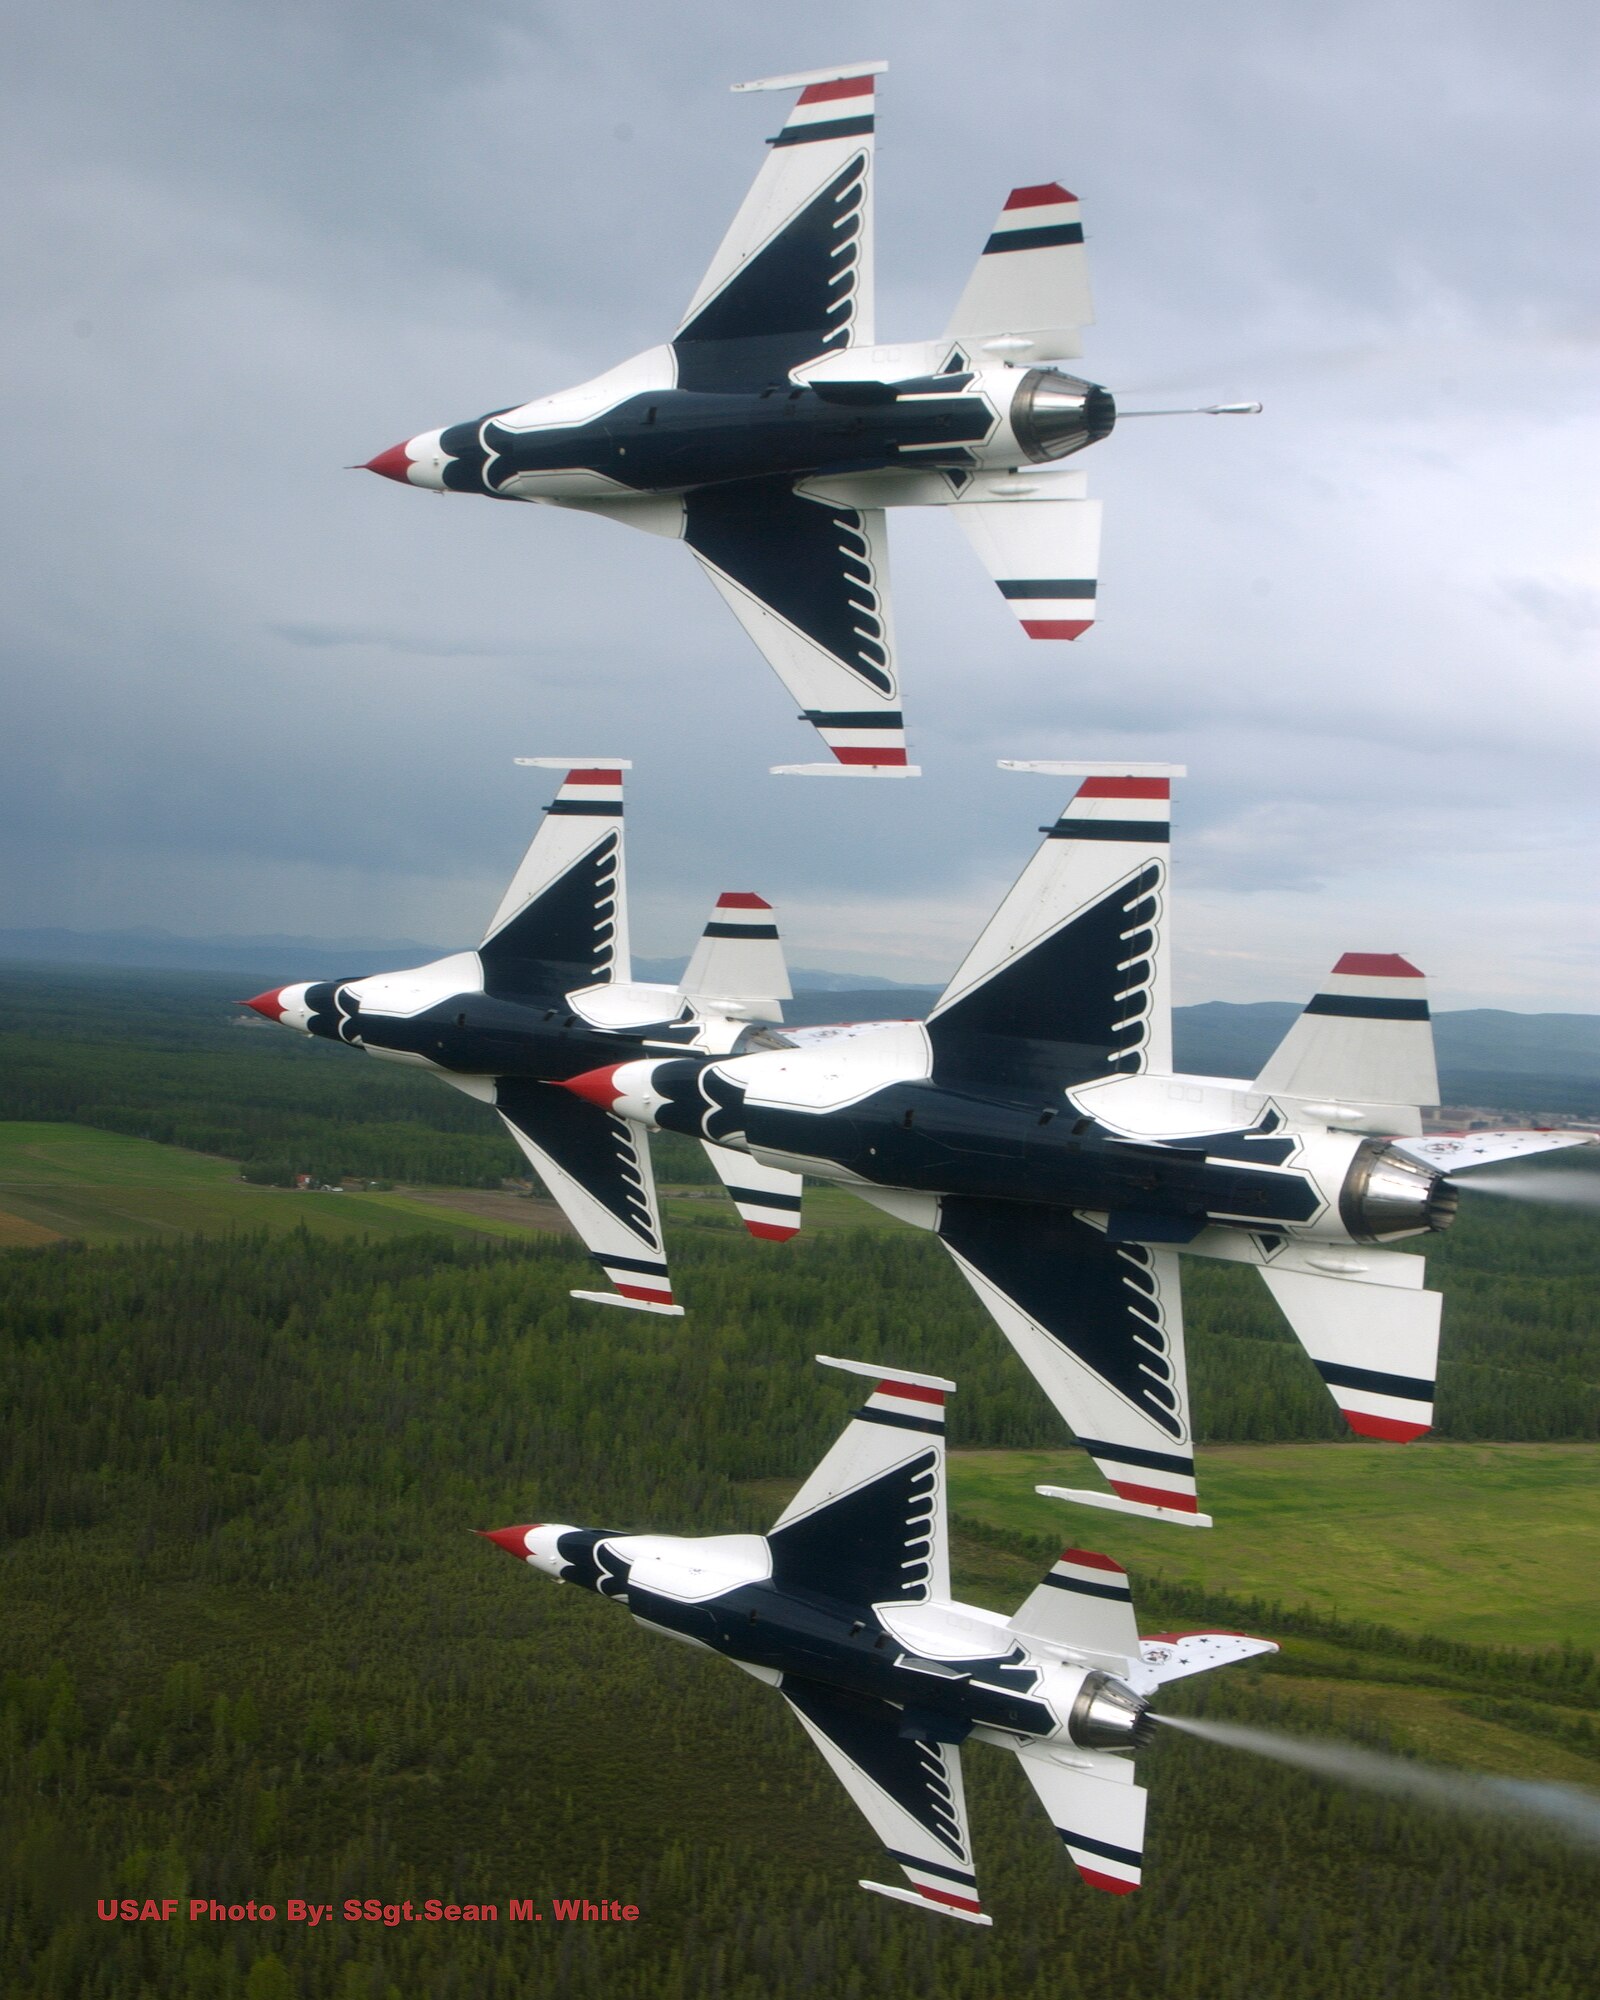 The U.S. Air Force Thunderbirds are set to perform at The Great New England Air Show at Westover ARB, Sept. 6-7.  The aerial demonstration team flies the F-16C fighter jet.  Also to be featured during the air show is the U.S. Navy's F-18 aerial demonstration team, The U.S. Air Force Academy's Glider team, the U.S. Army's Golden Knights Parachute team as well as fly overs by various other aircraft.  The air show is free and open to the public.  Gates open at 9:00 a.m. both Saturday and Sunday.      